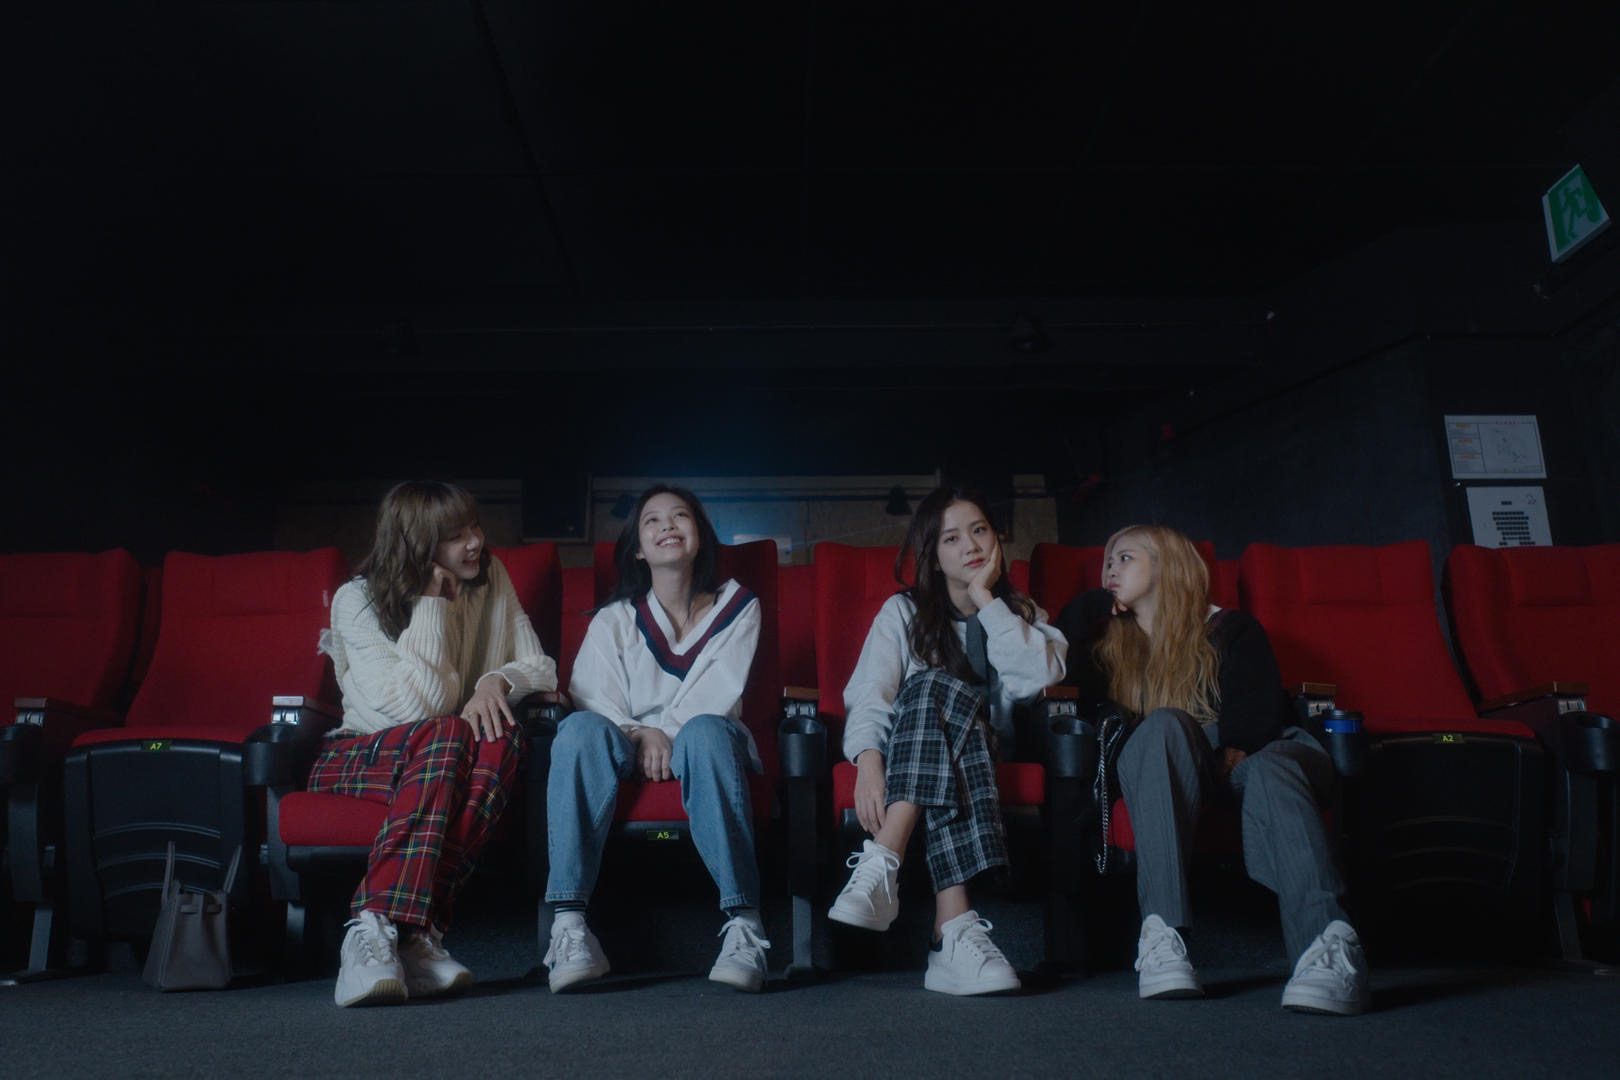 WATCH: BLACKPINK members get real in ‘Light Up The Sky’ trailer